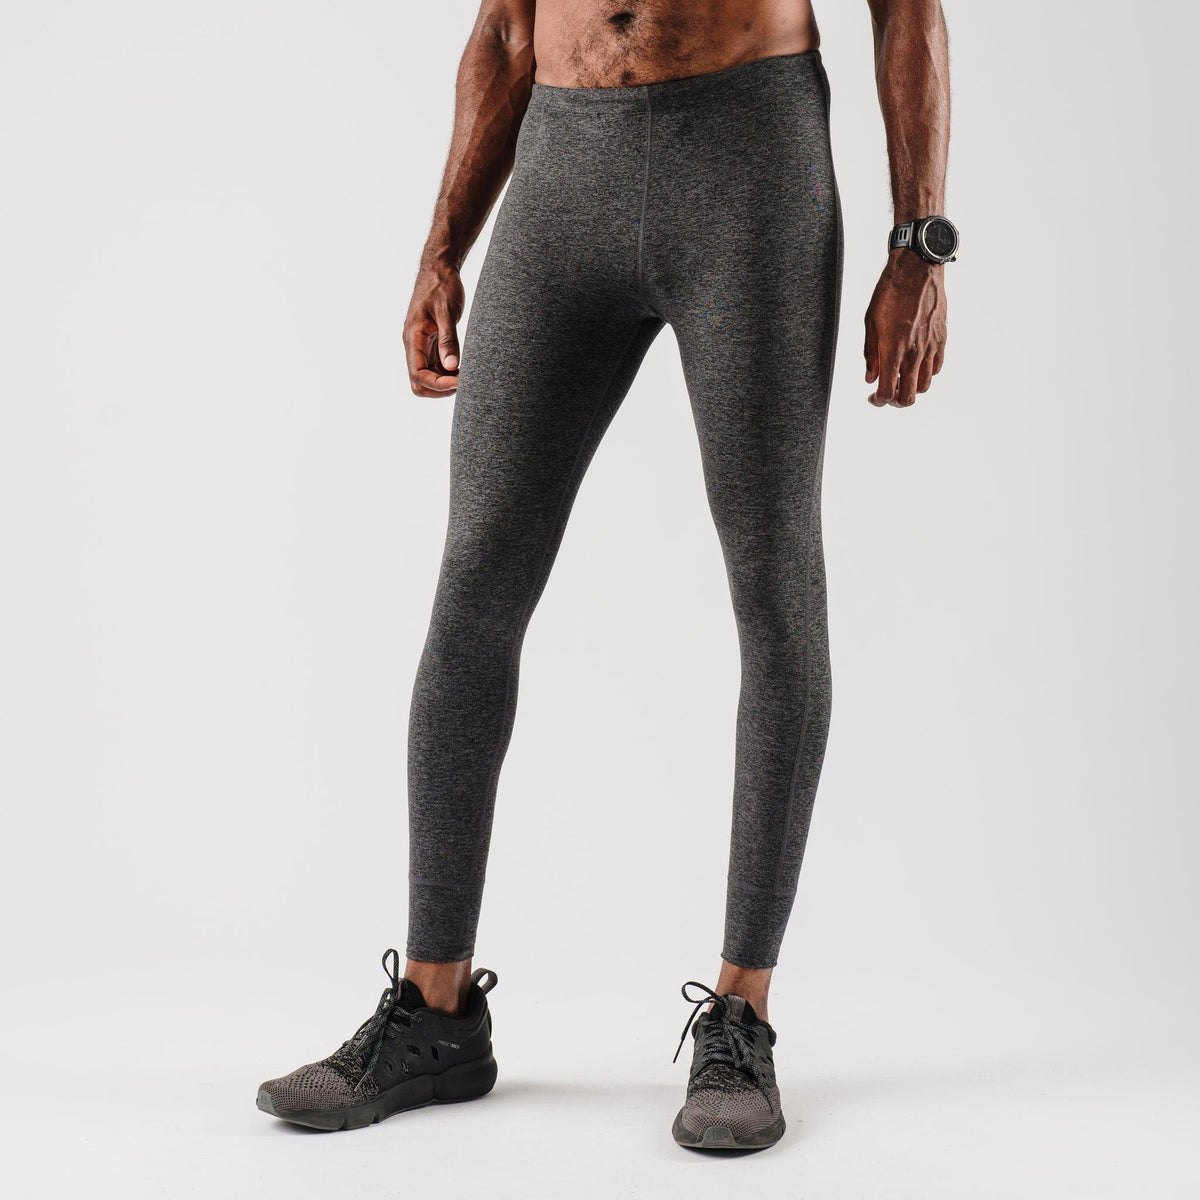 First Ascent Men's Kinetic Run Tights, by First Ascent, Price: R 799,9, PLU 1139874